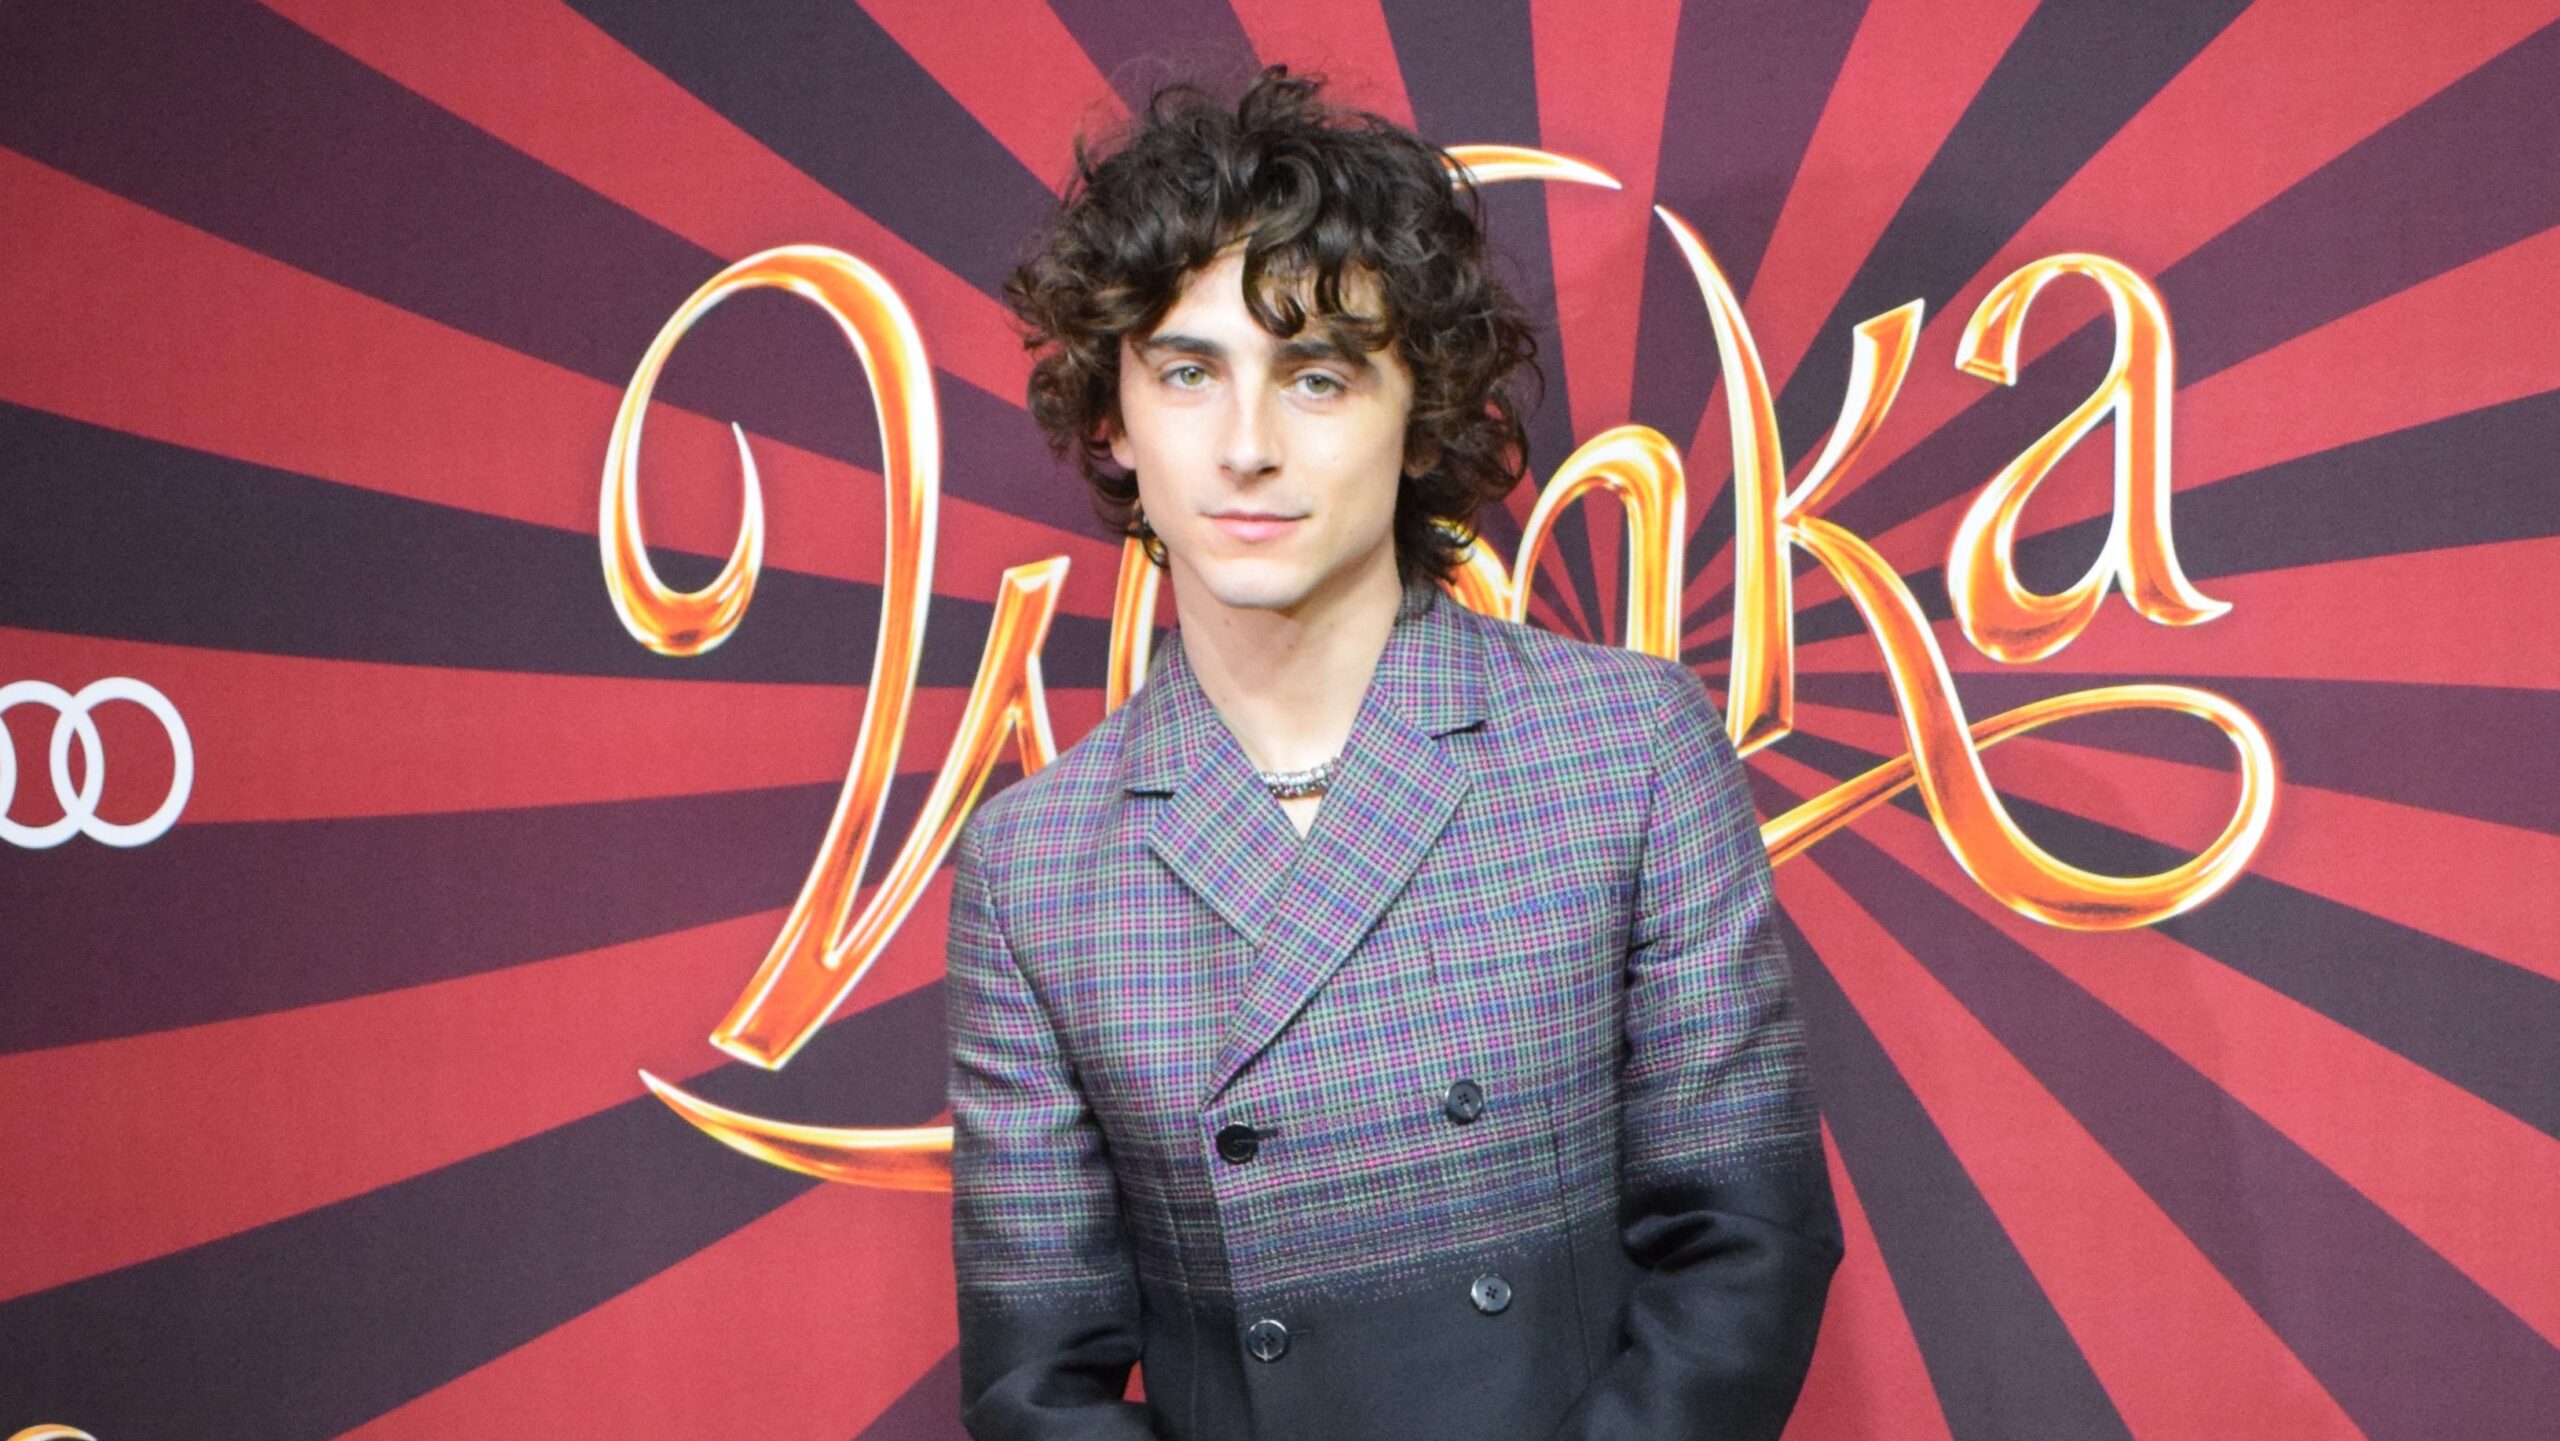 #SPOTTED: TIMOTHÉE CHALAMET IN TORONTO FOR “WONKA”